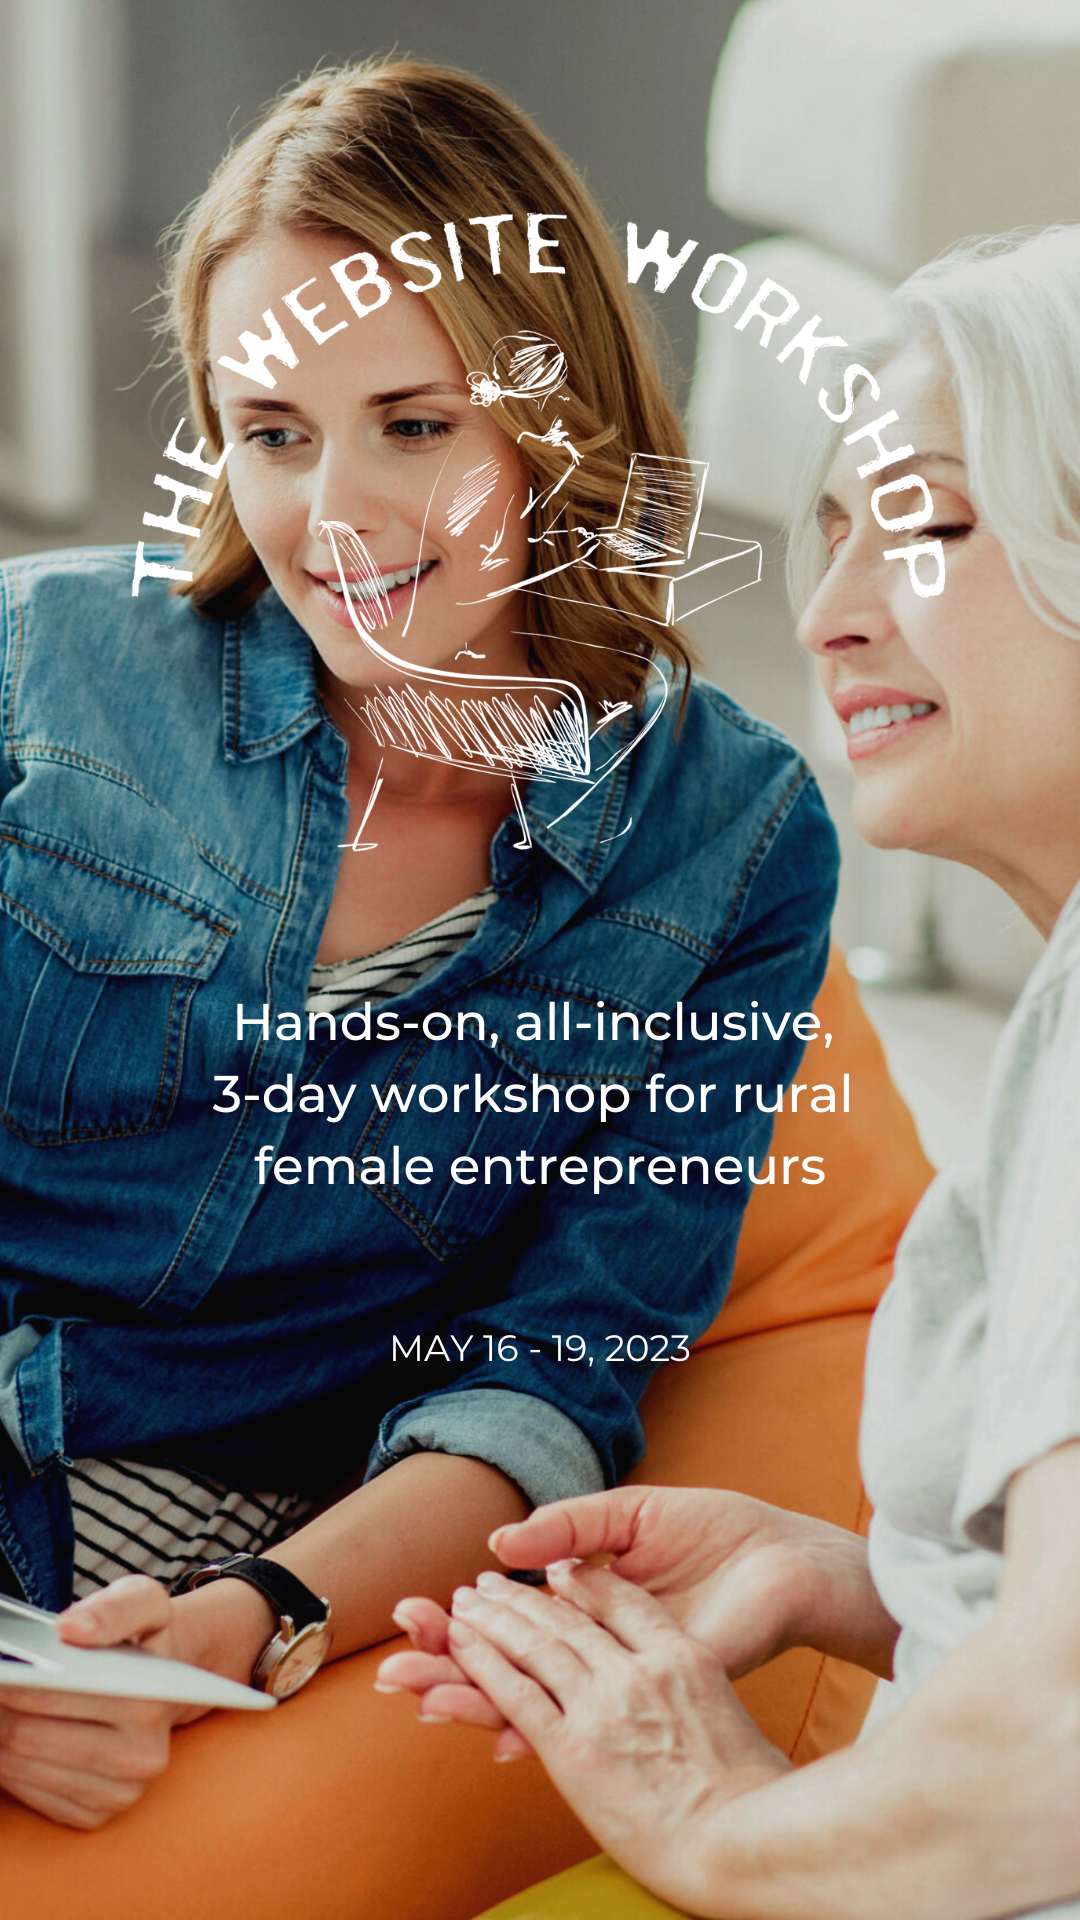 The Website Workshop promotional image featuring two women sitting looking at a laptop. Includes the Website Workshop Logo and the words: Hands-on, all-inclusive, 3-day workshop for rural female entrepreneurs. May 16-19, 2023.